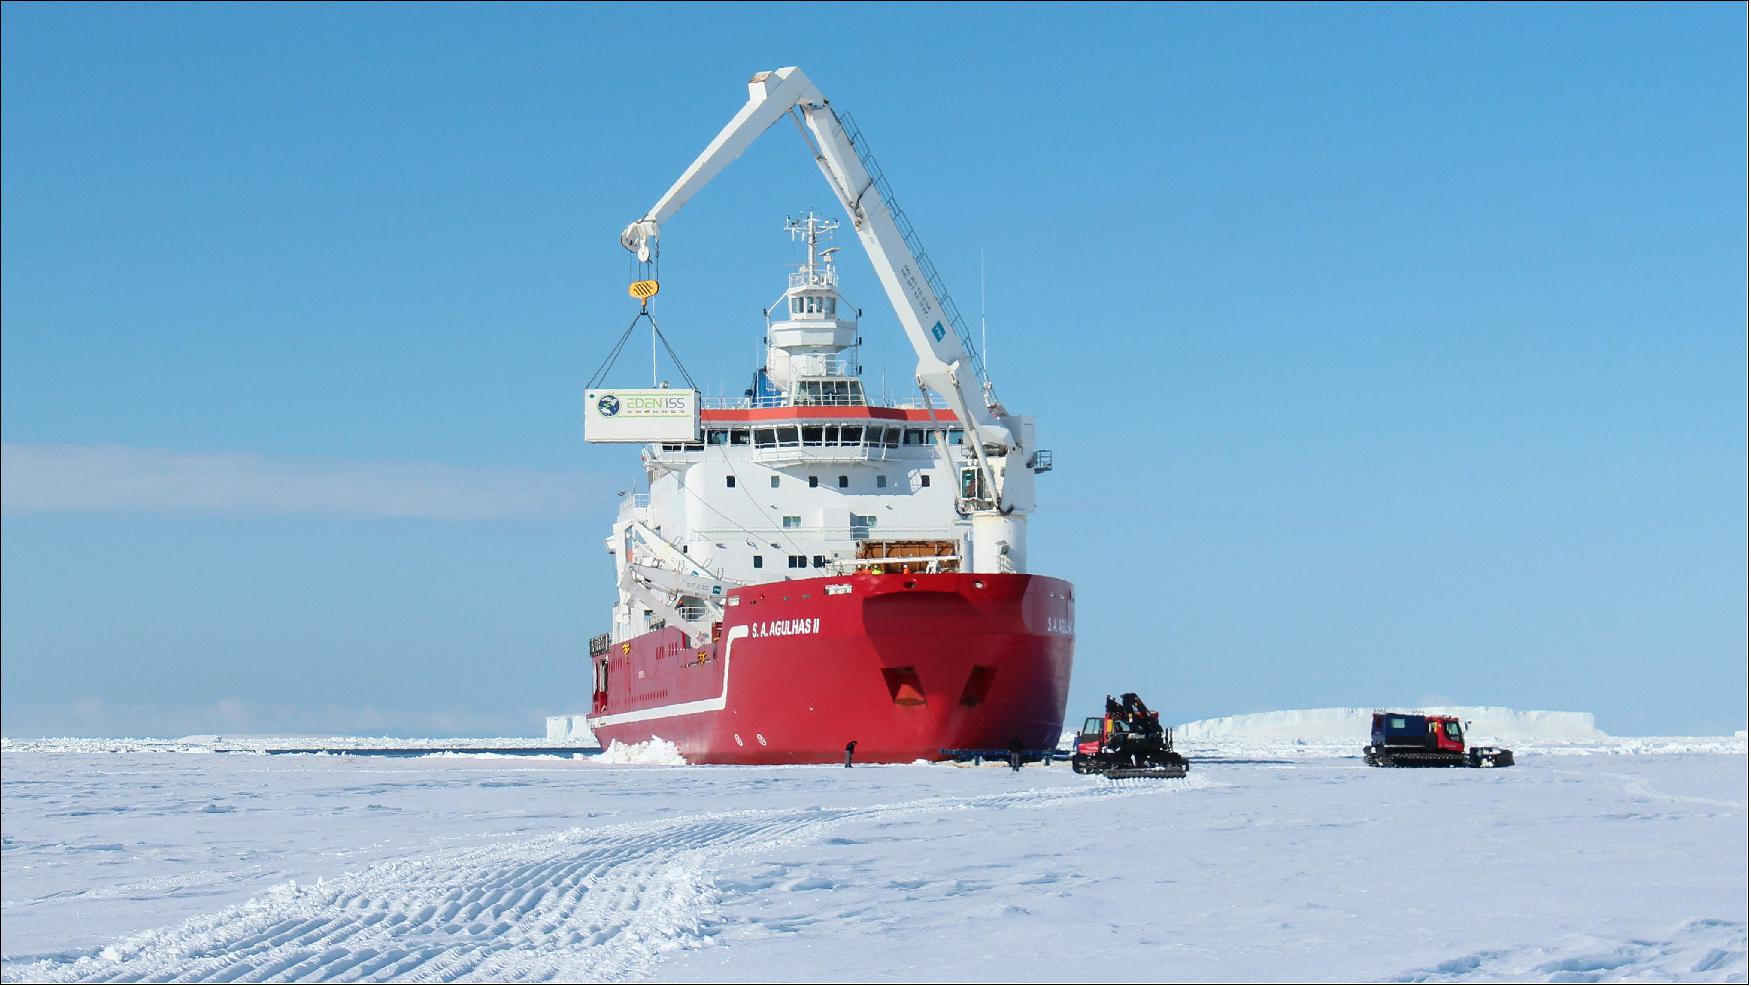 Figure 8: Unloading of EDEN ISS in Antarctica in early January 2018 (image credit: DLR)